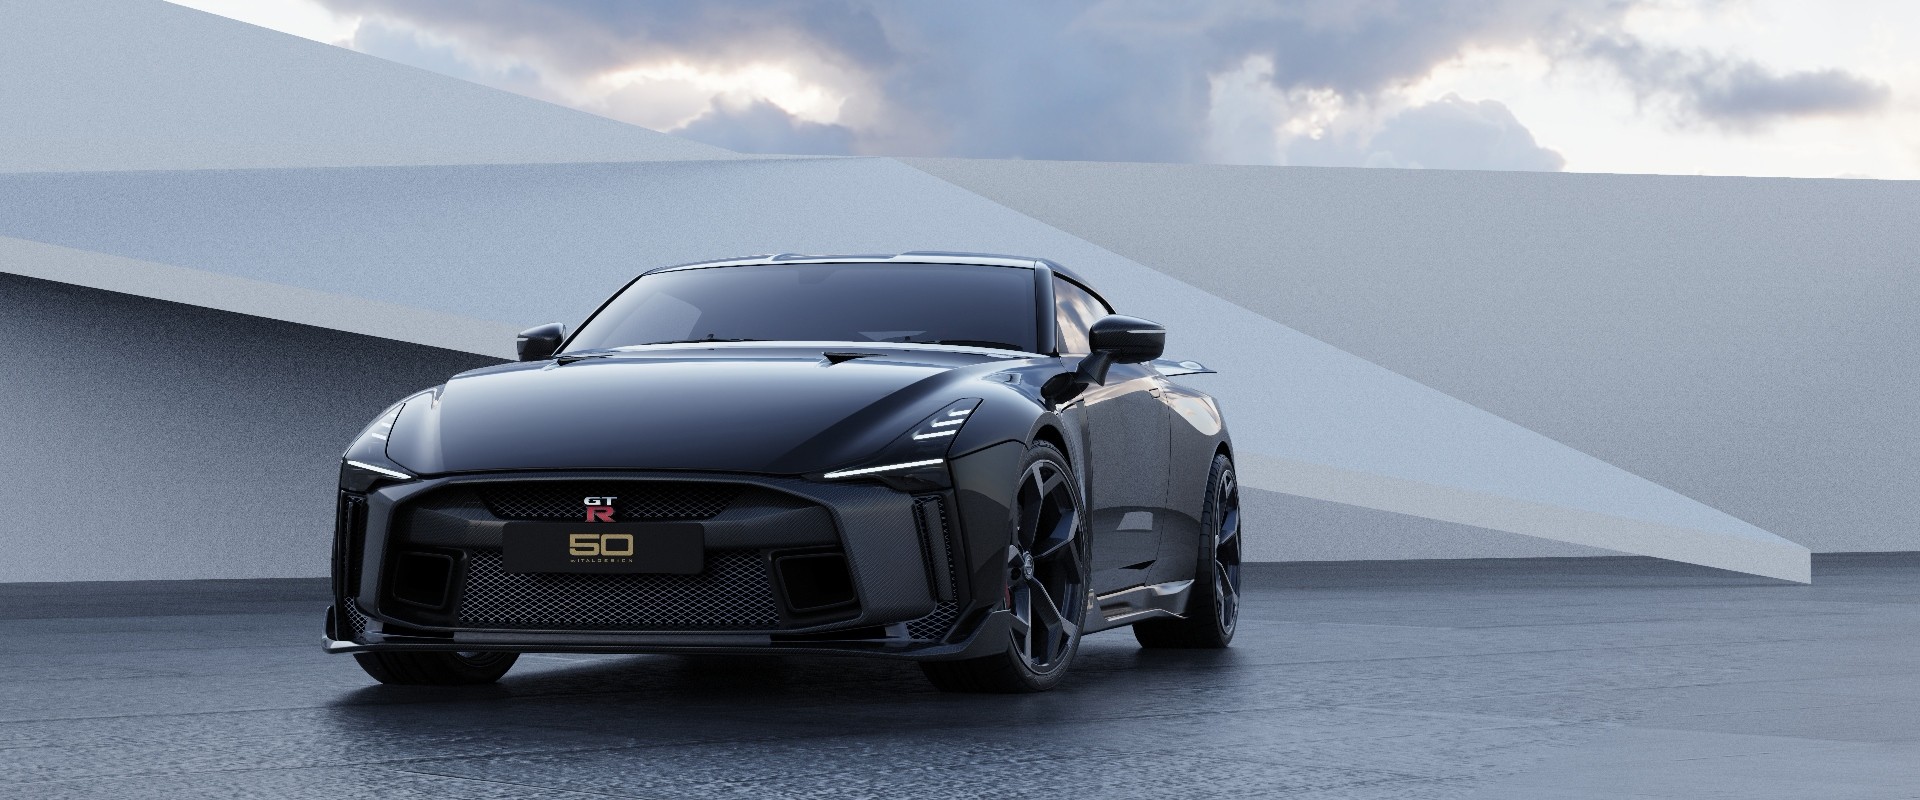 https://s1.cdn.autoevolution.com/images/news/gallery/next-generation-nissan-gt-r-rendered-looks-like-a-mid-engined-supercar_1.jpg